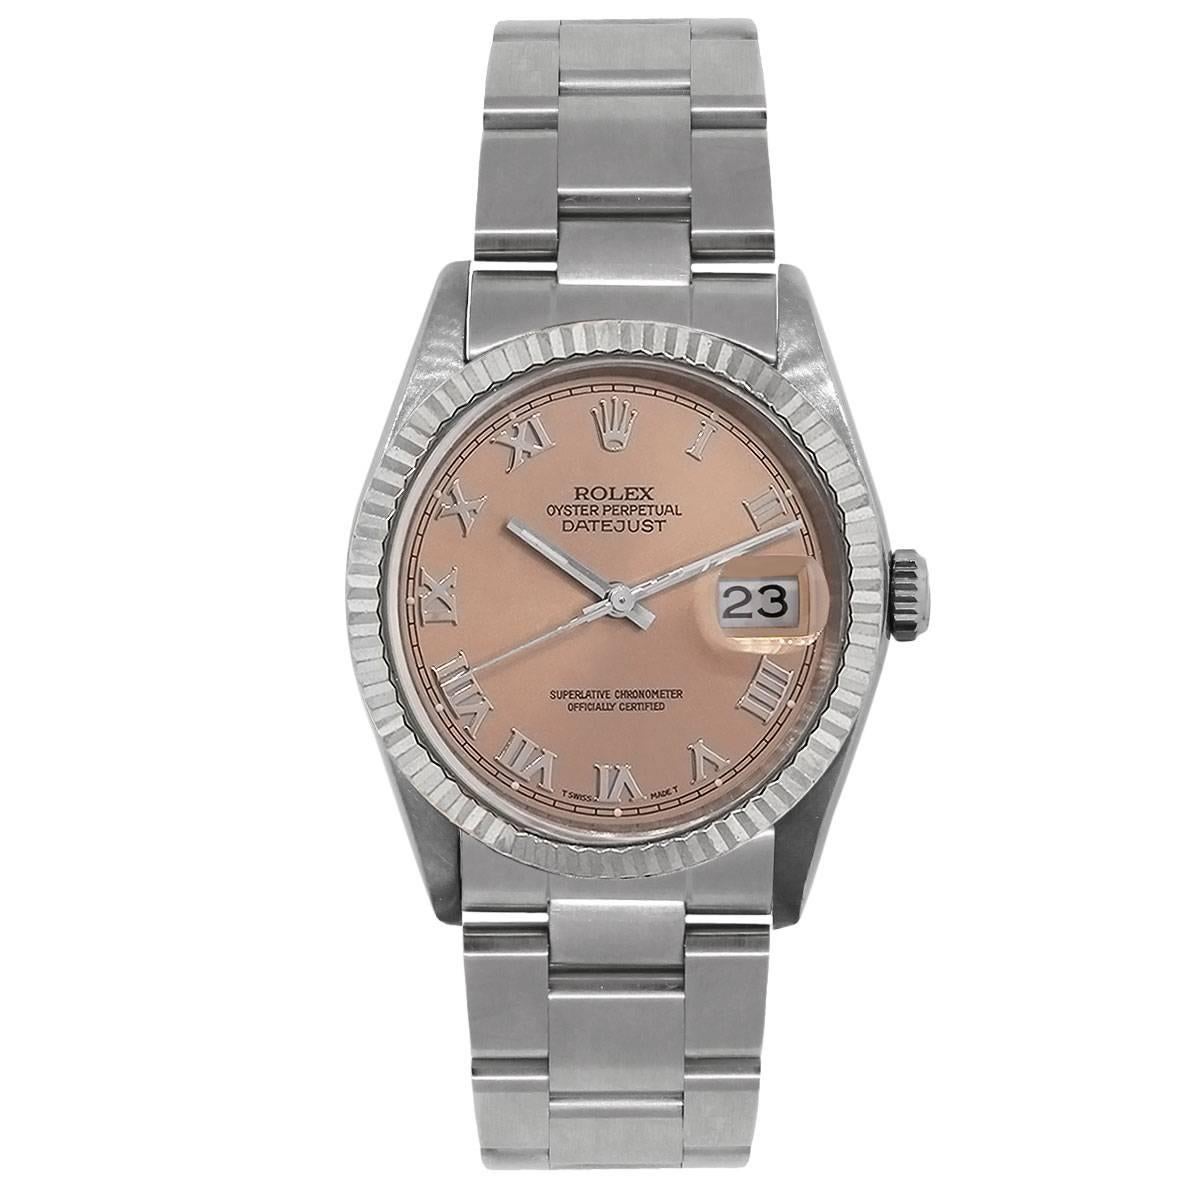 Brand: Rolex
MPN: 16234
Model: Datejust
Case Material: Stainless Steel
Case Diameter: 36mm
Crystal: Sapphire crystal
Bezel: Stainless steel fluted bezel
Dial: Salmon dial with silver roman numerals, hour hand and minute hands. Date is displayed at 3